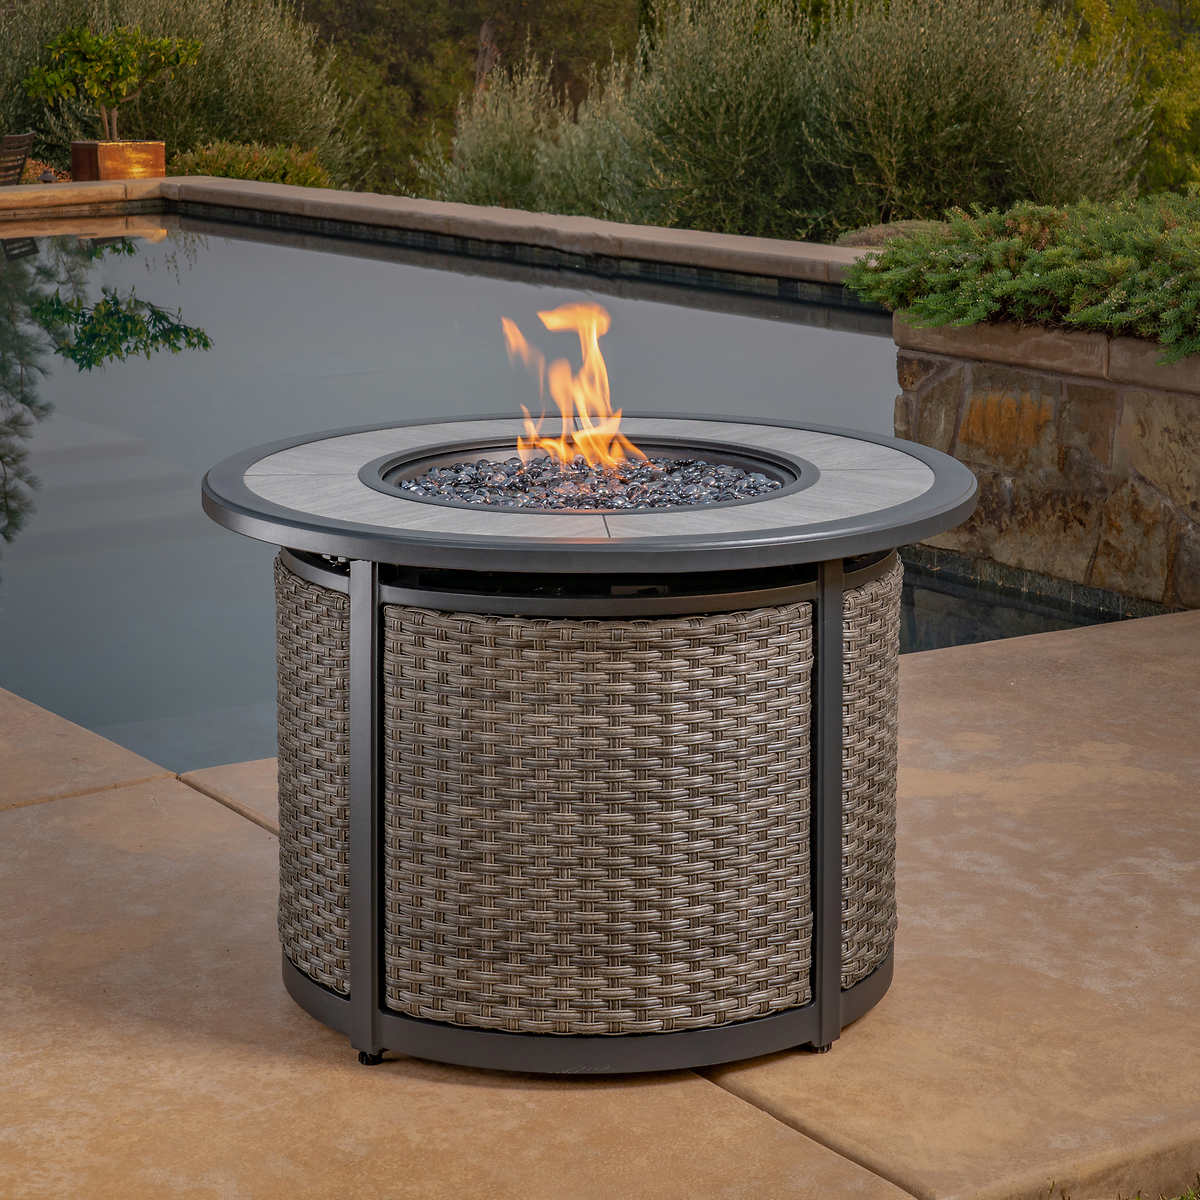 Madison Fire Pit Table Costco, Fire Pit Btu Recommendation